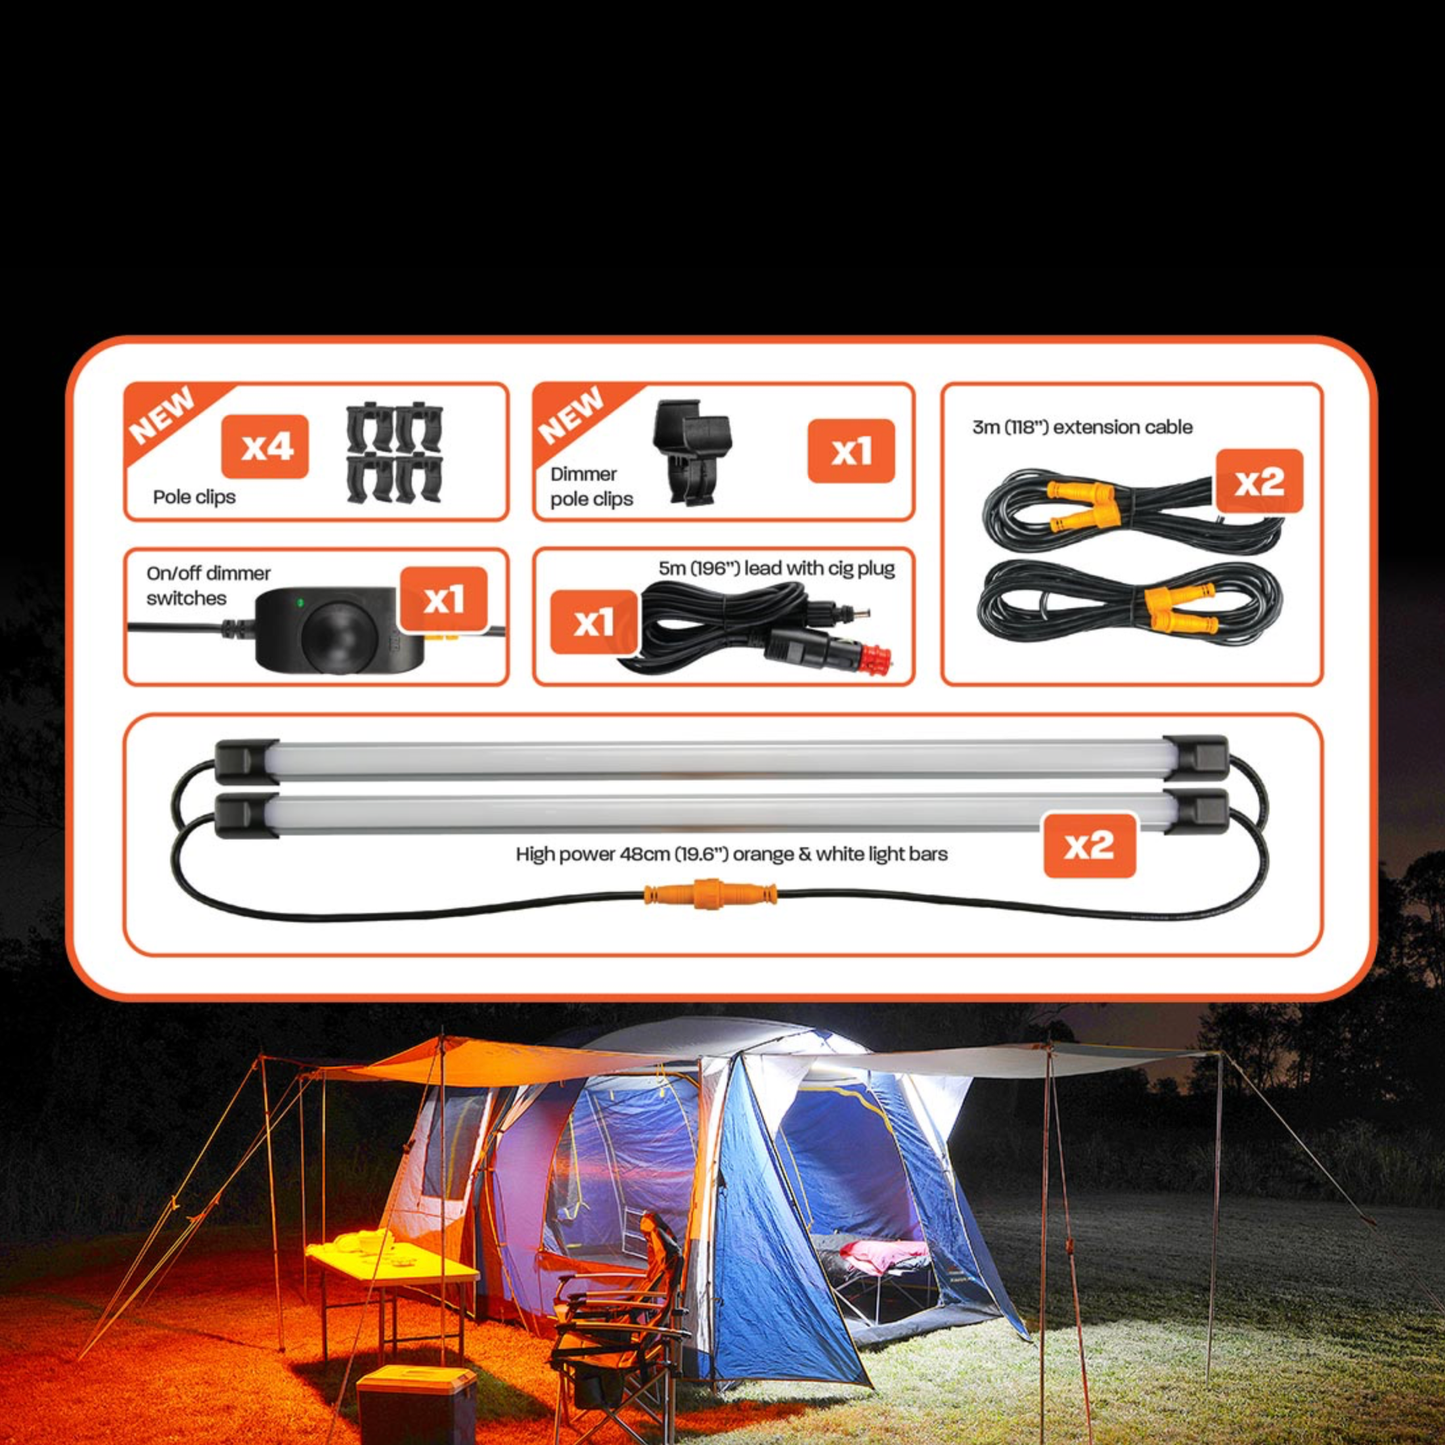 AreaBFE Tents Hard Korr 2 Bar Orange/White LED overlanding and camping light kit with diffusers.